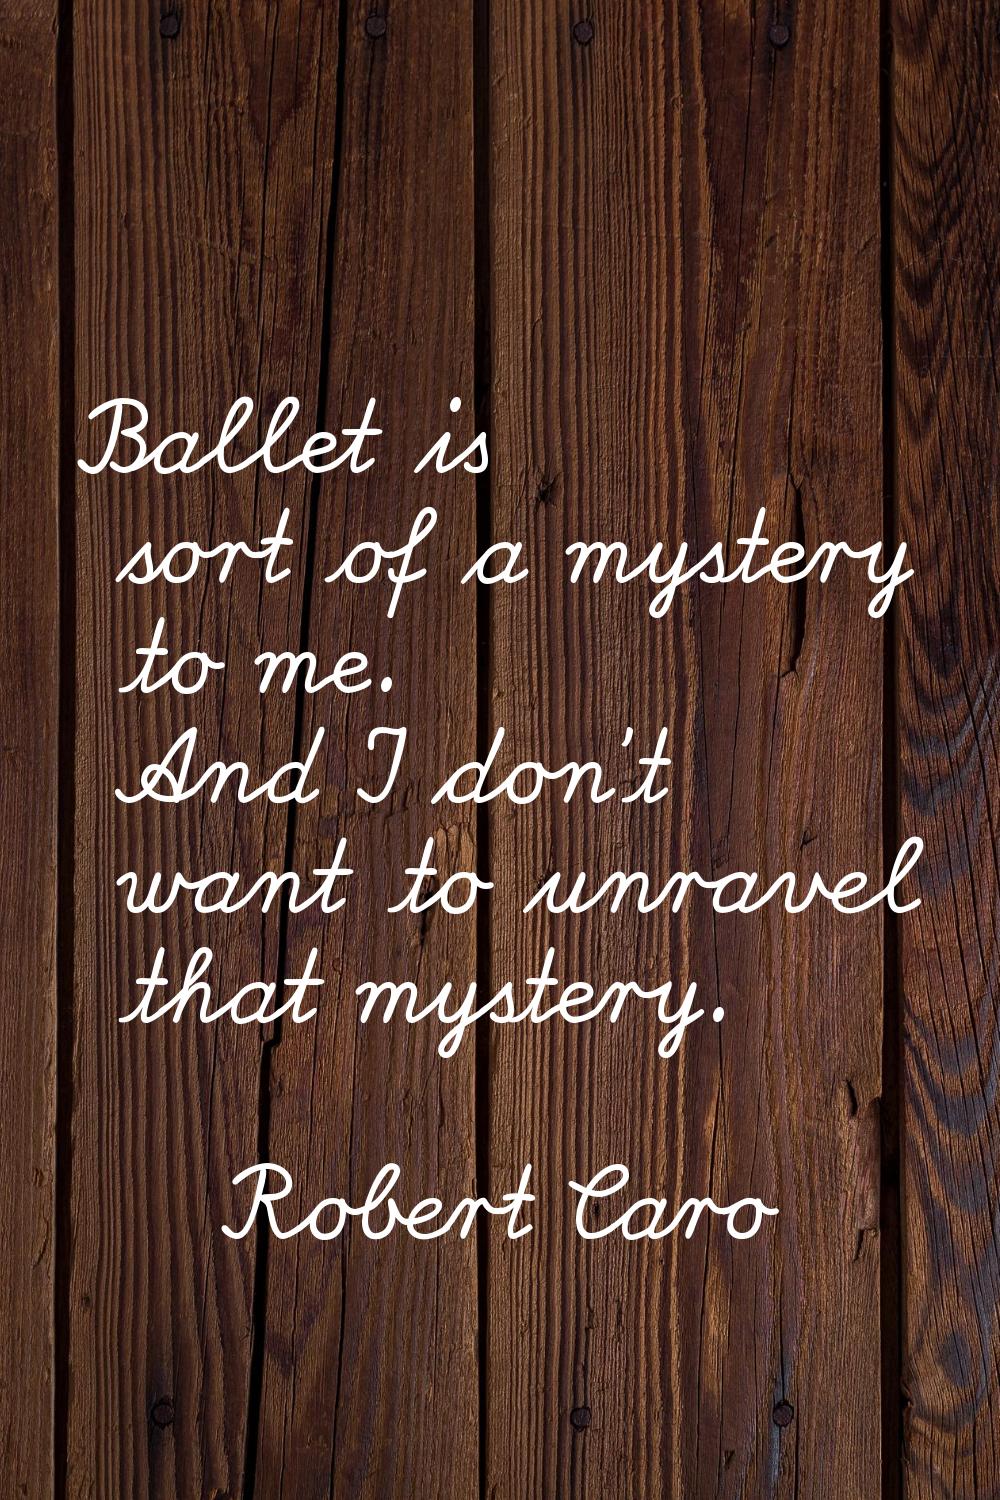 Ballet is sort of a mystery to me. And I don't want to unravel that mystery.